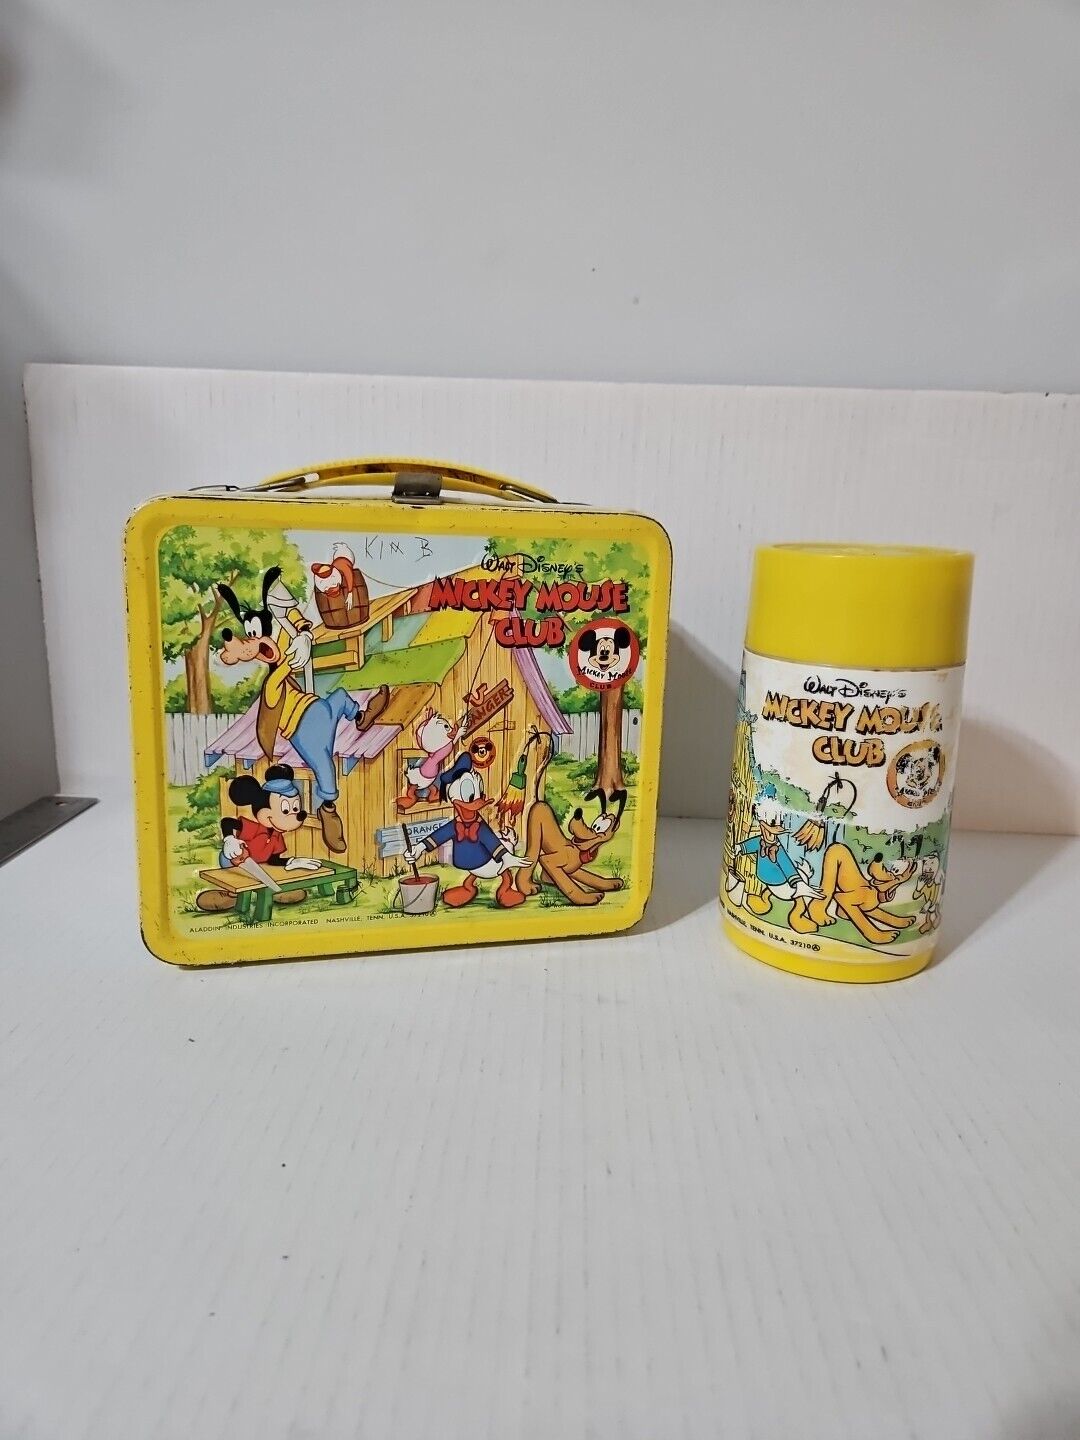 Vintage 70's Walt Disney Mickey Mouse Club Metal Lunchbox /Thermos Has Scratches